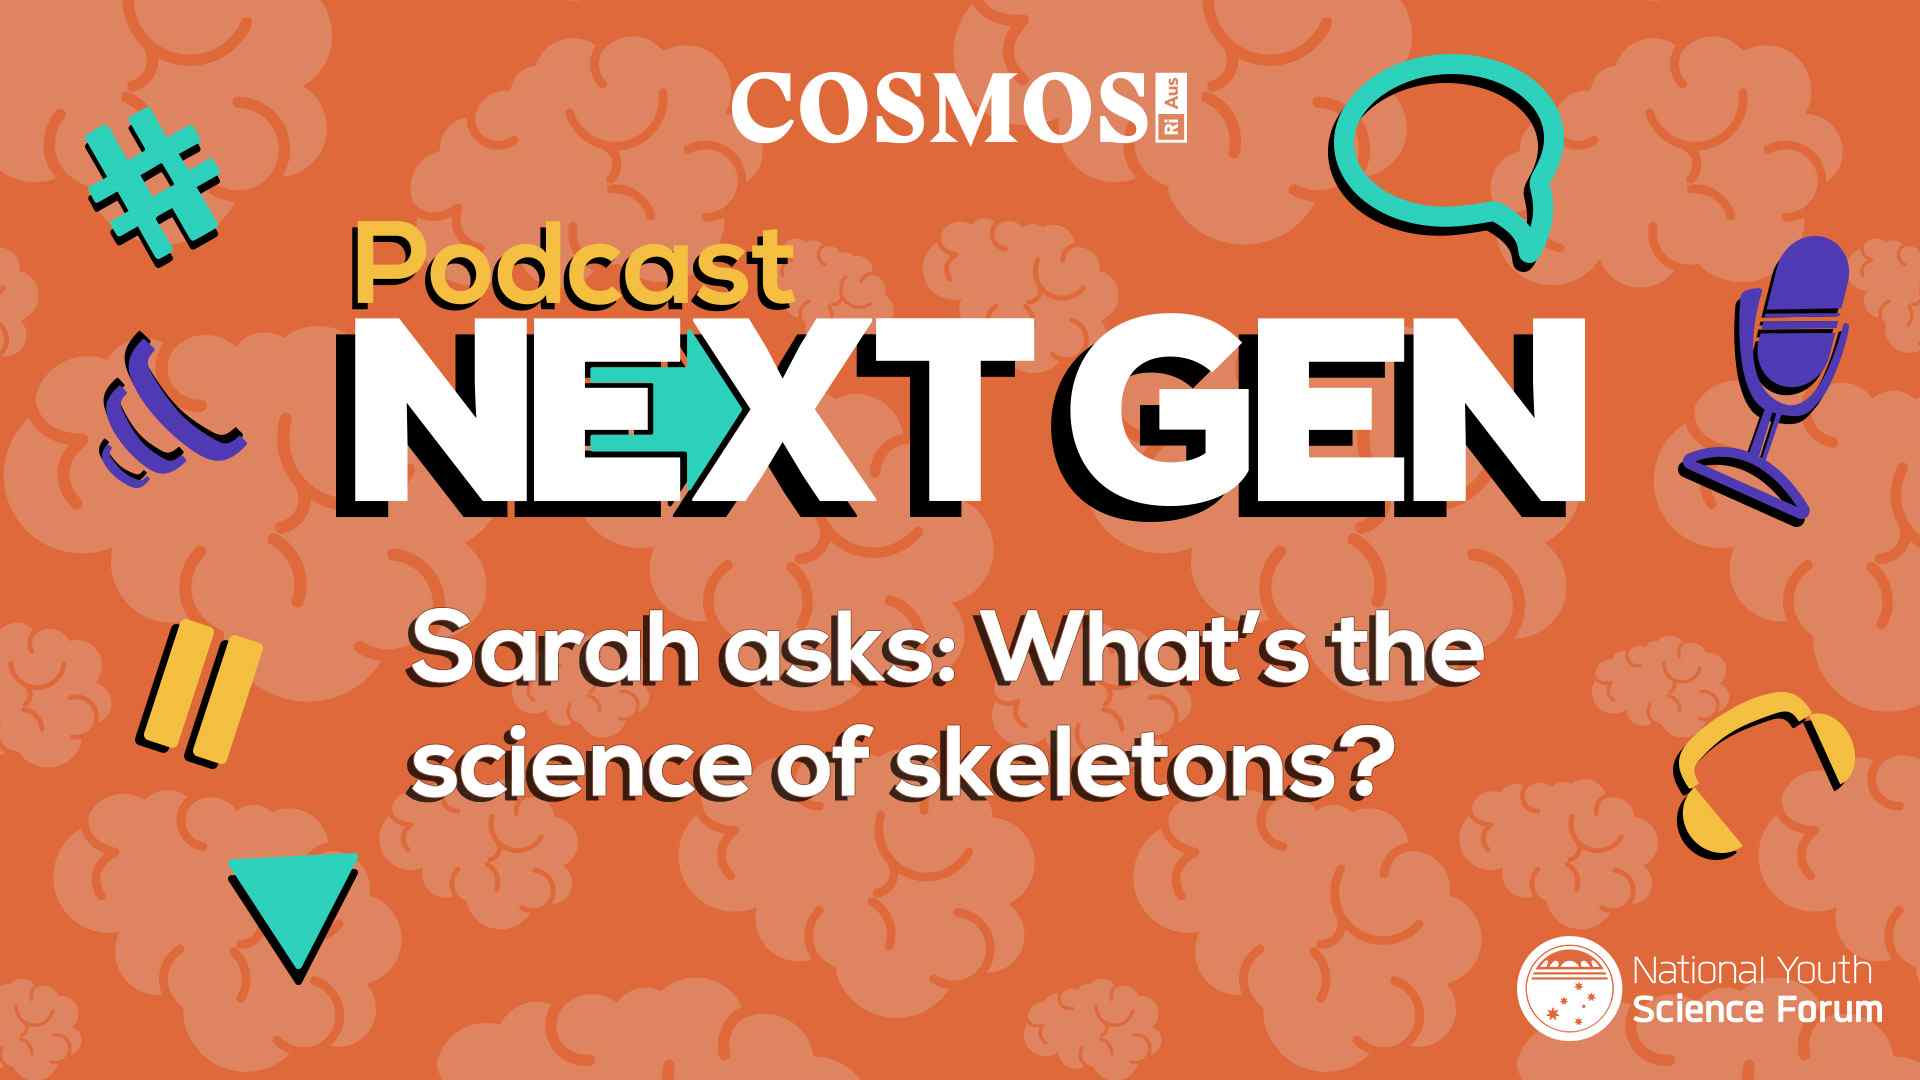 PODCAST NEXT GEN: What’s the science of skeletons?